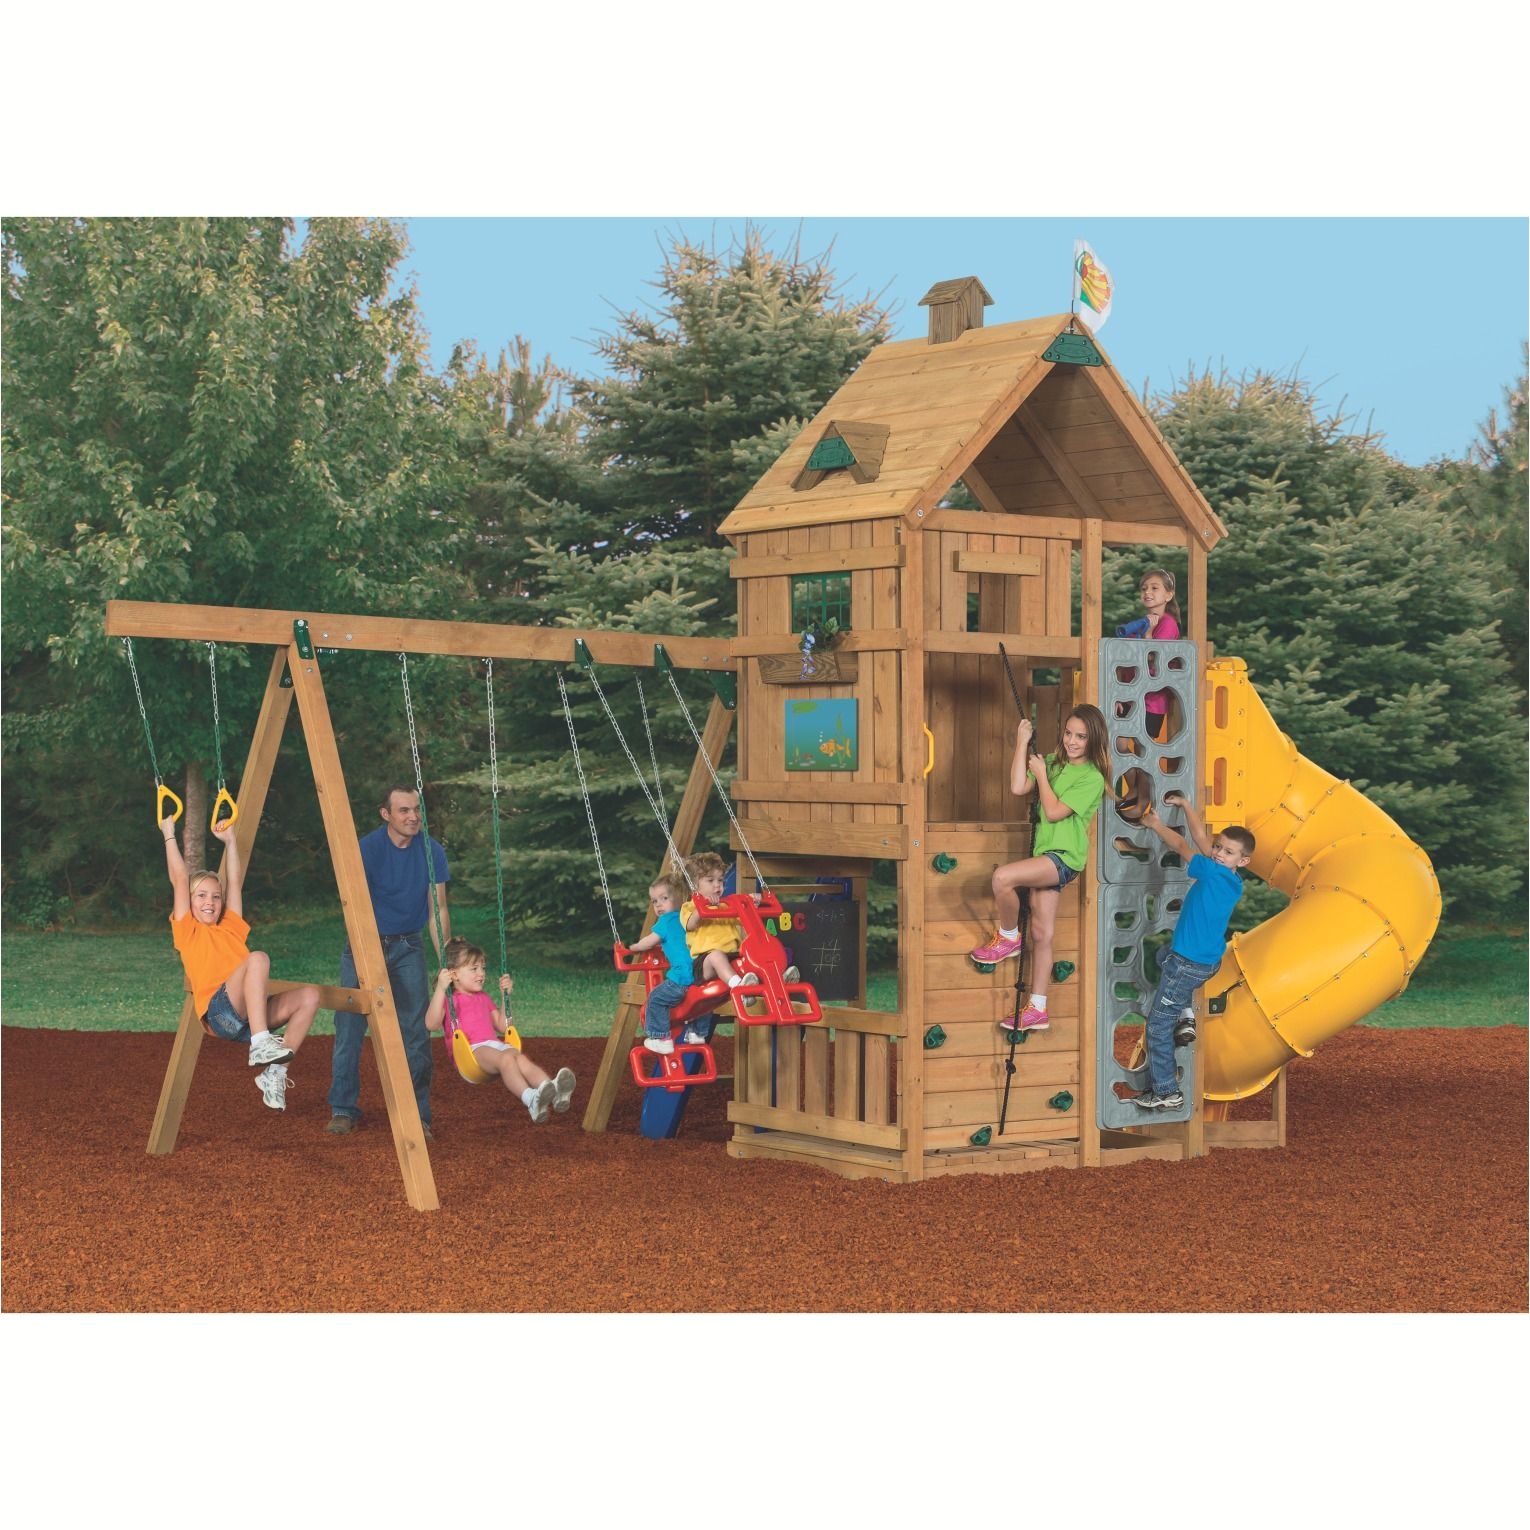 explore more with the playstara legacy gold playset sturdy and safe this playset